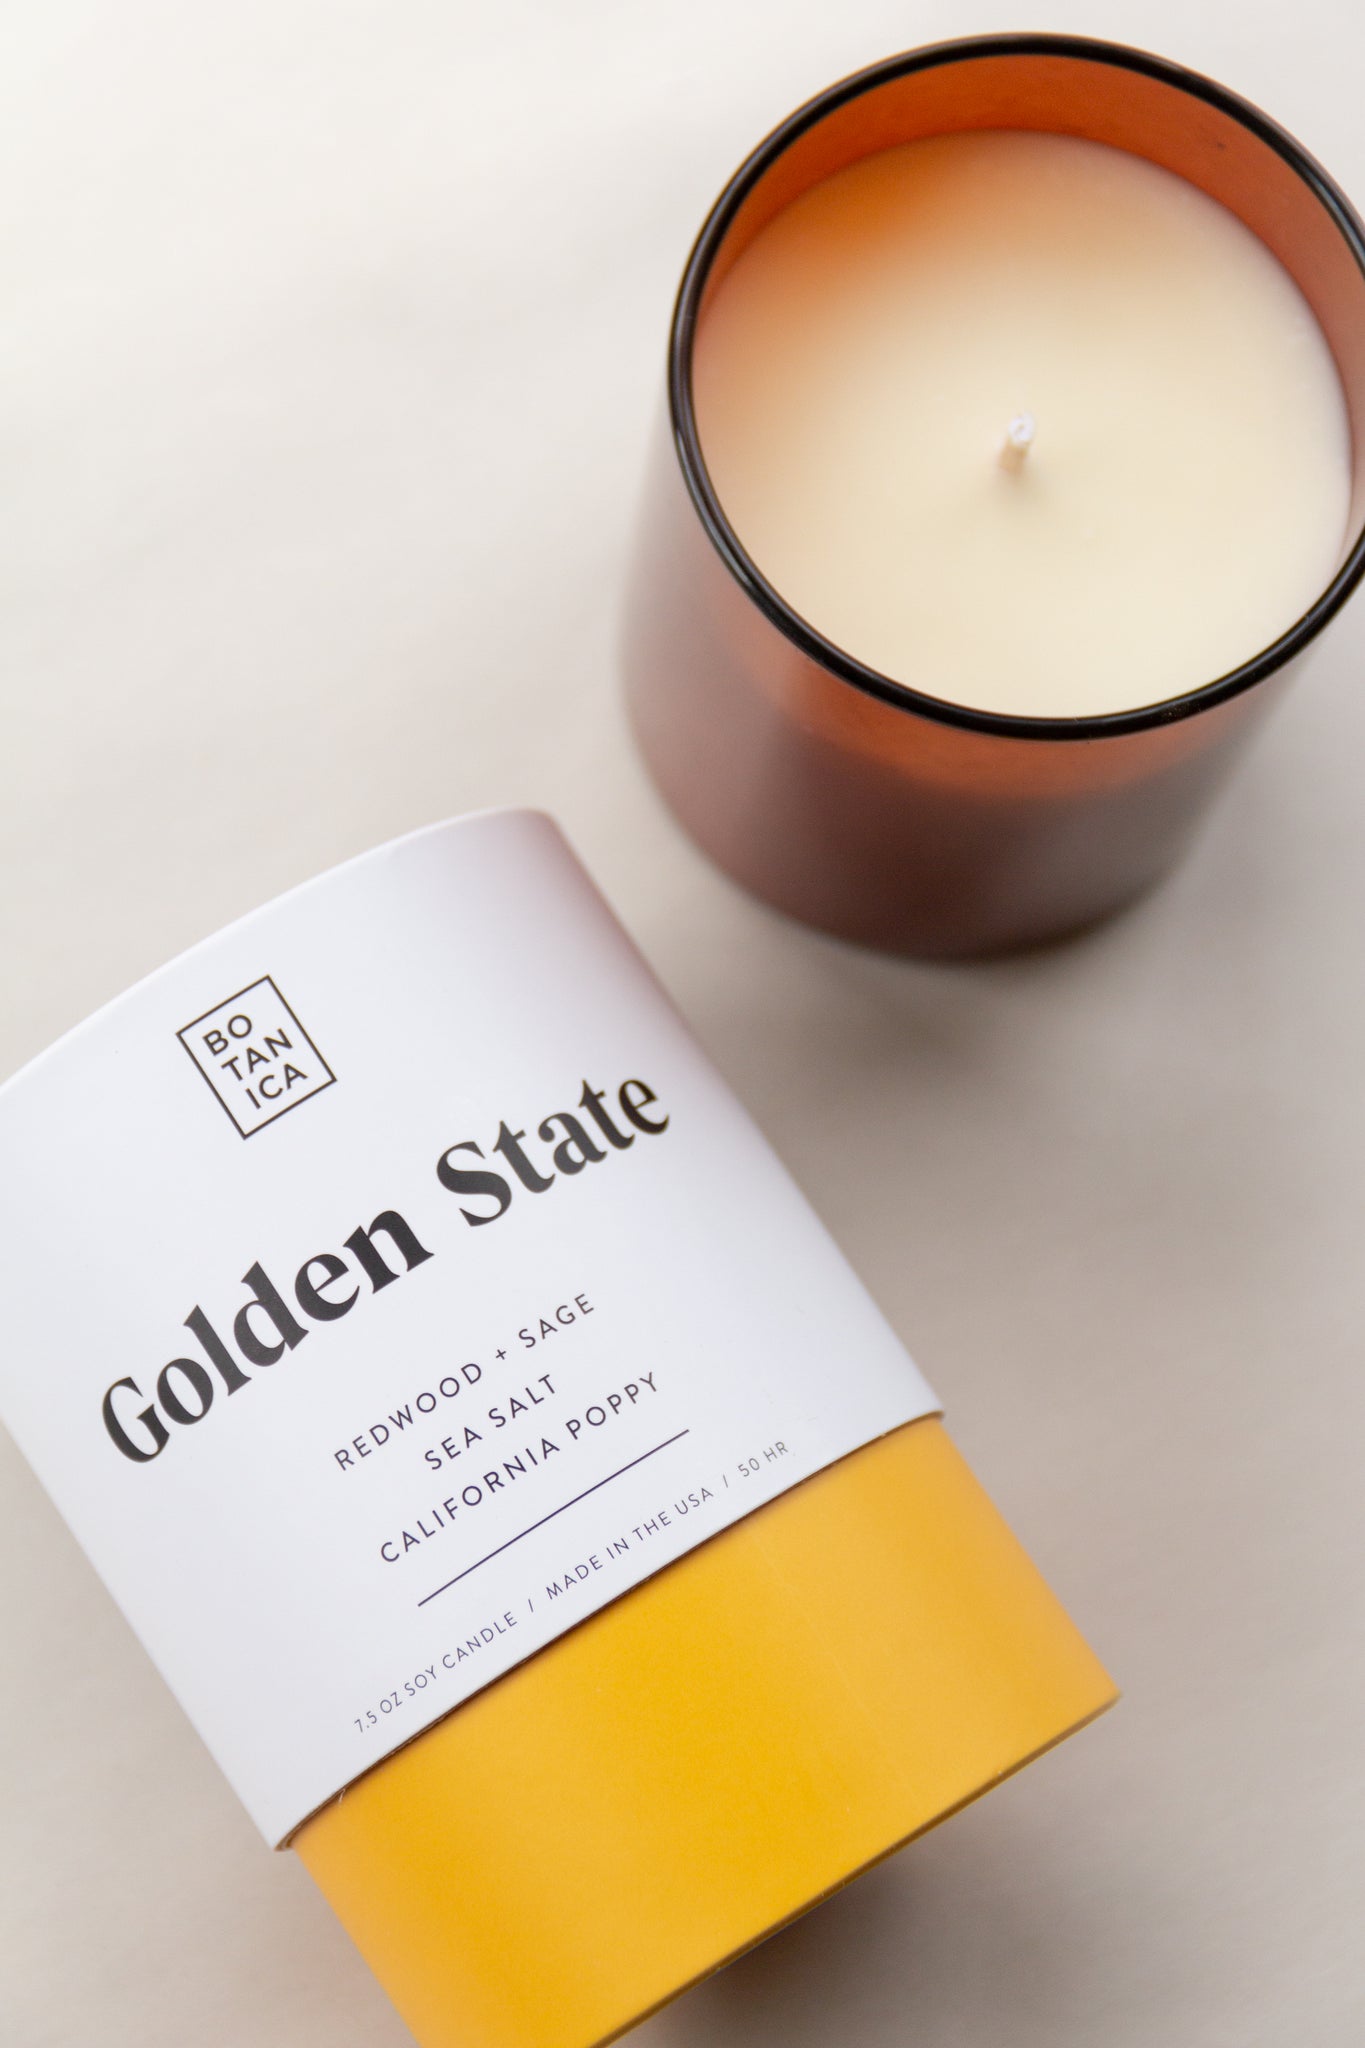 Golden State Candle